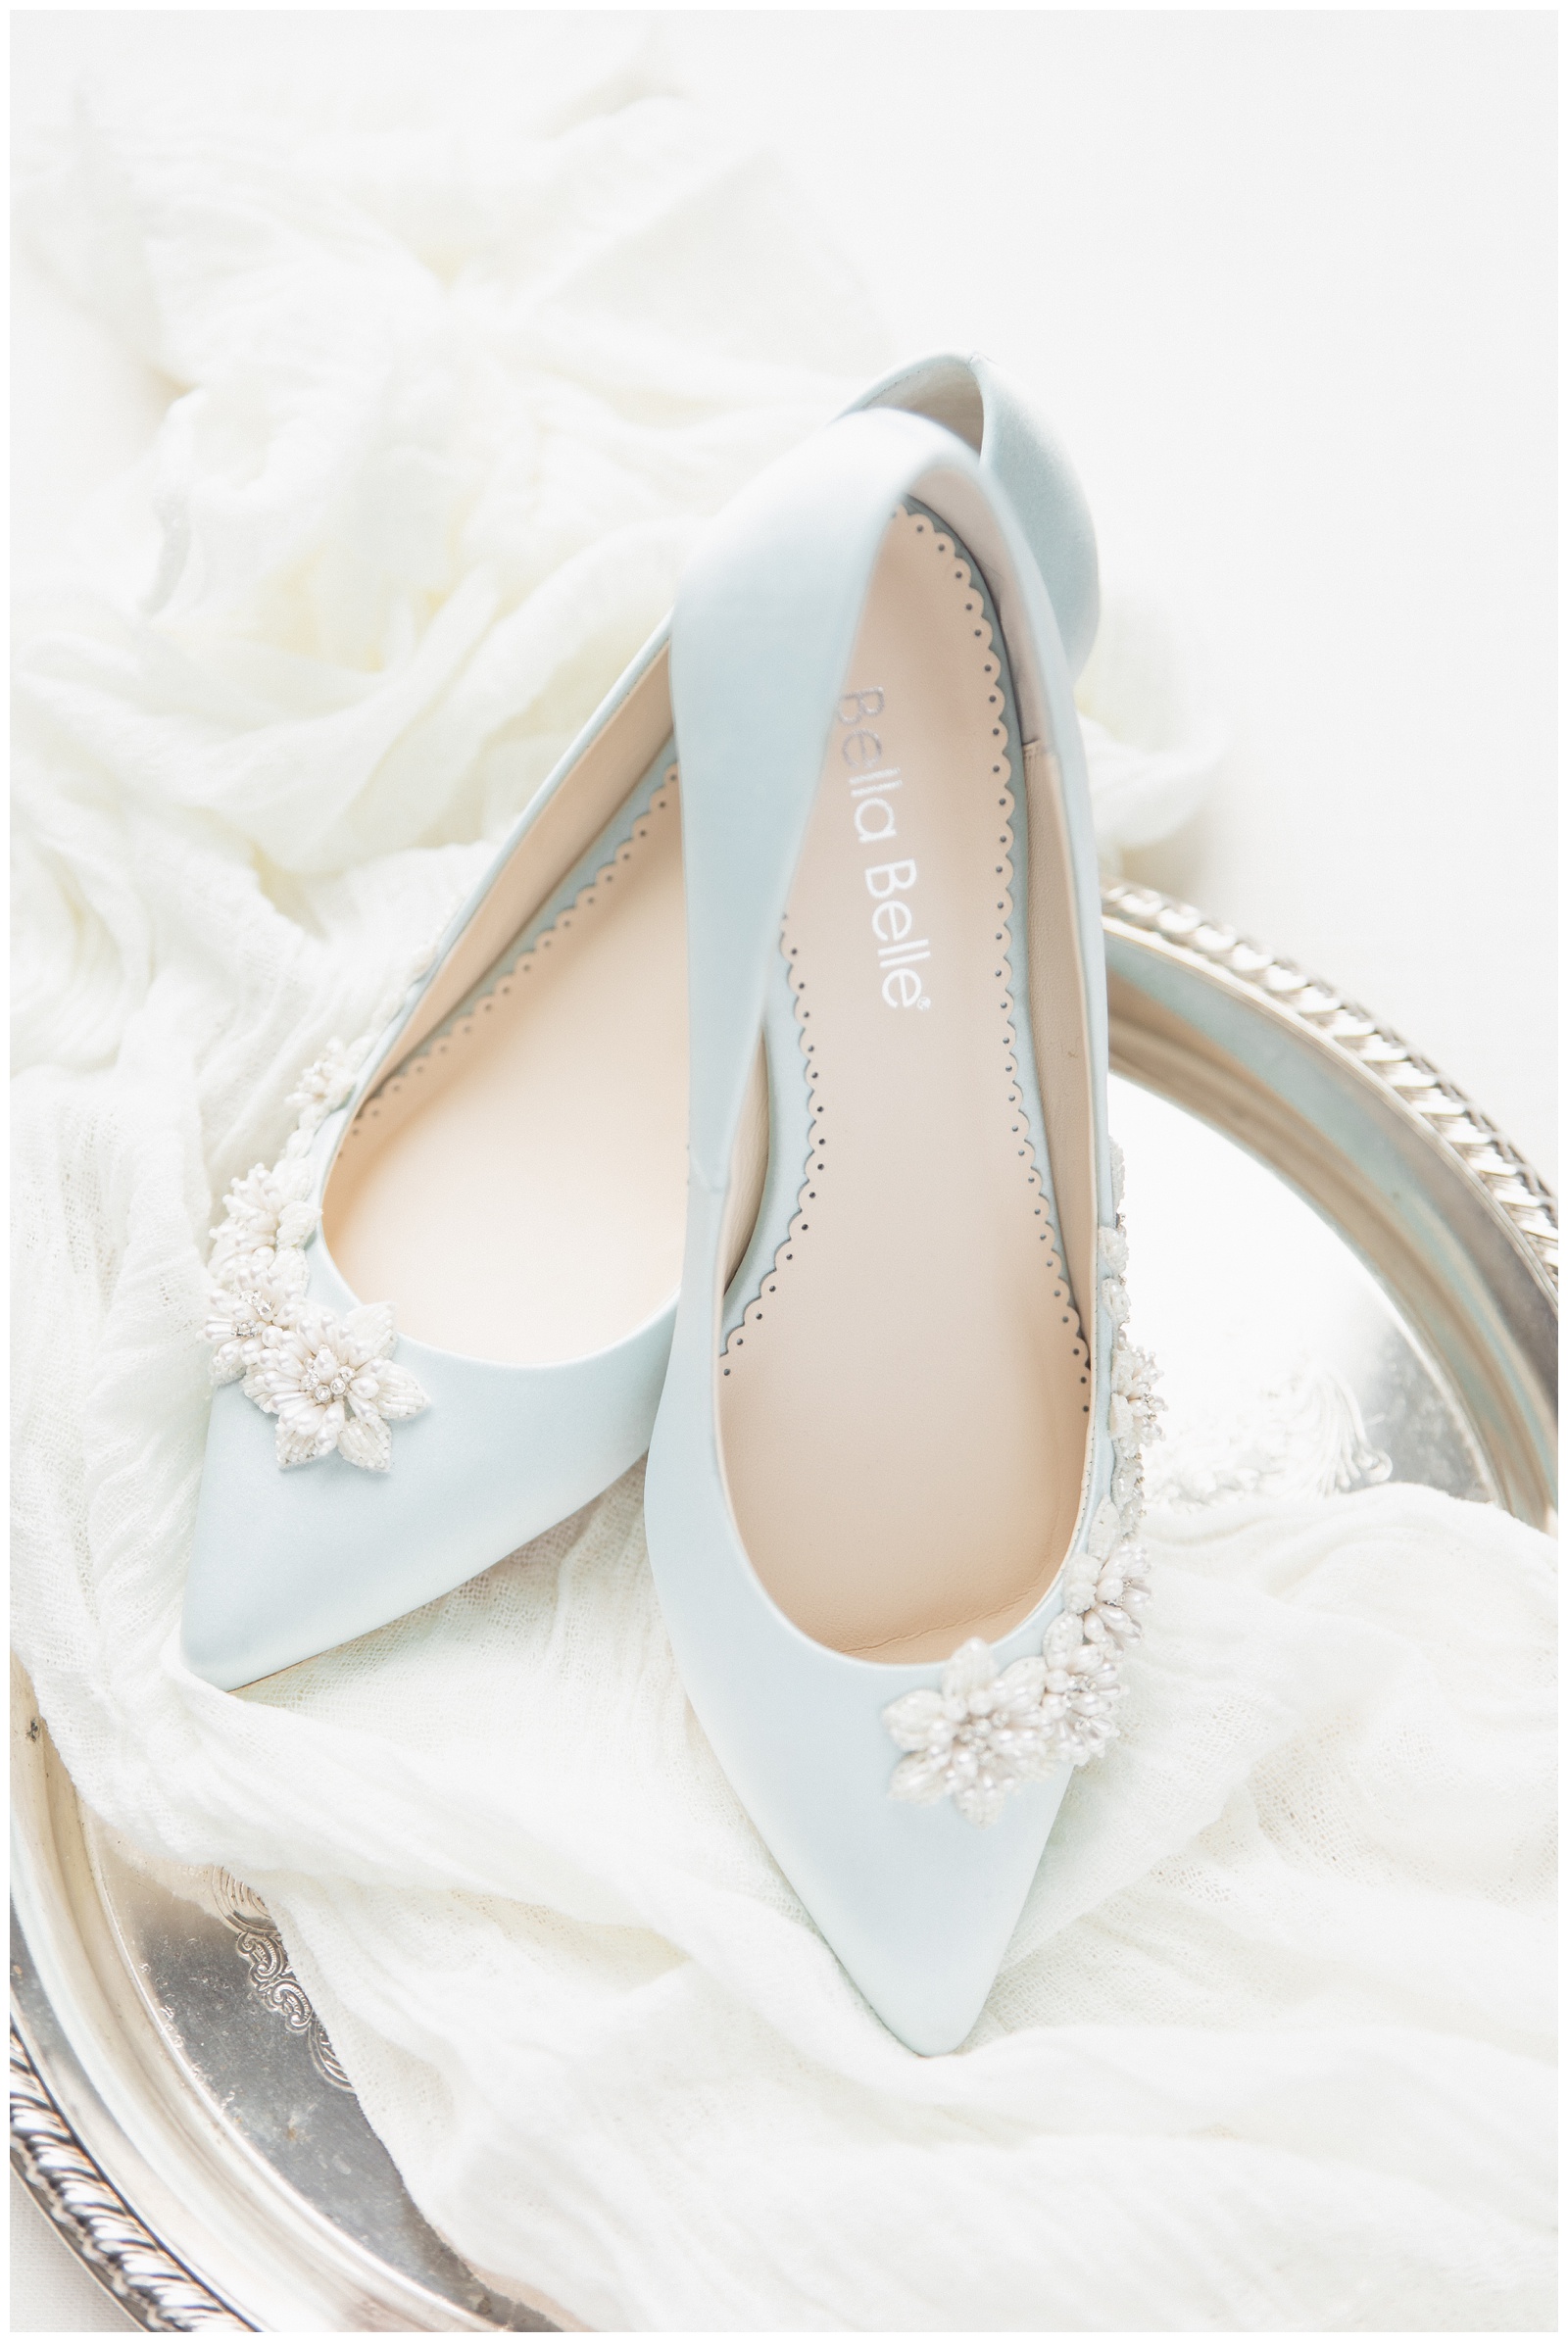 Bella Belle blue wedding shoes | Matlock and Kelly Photography